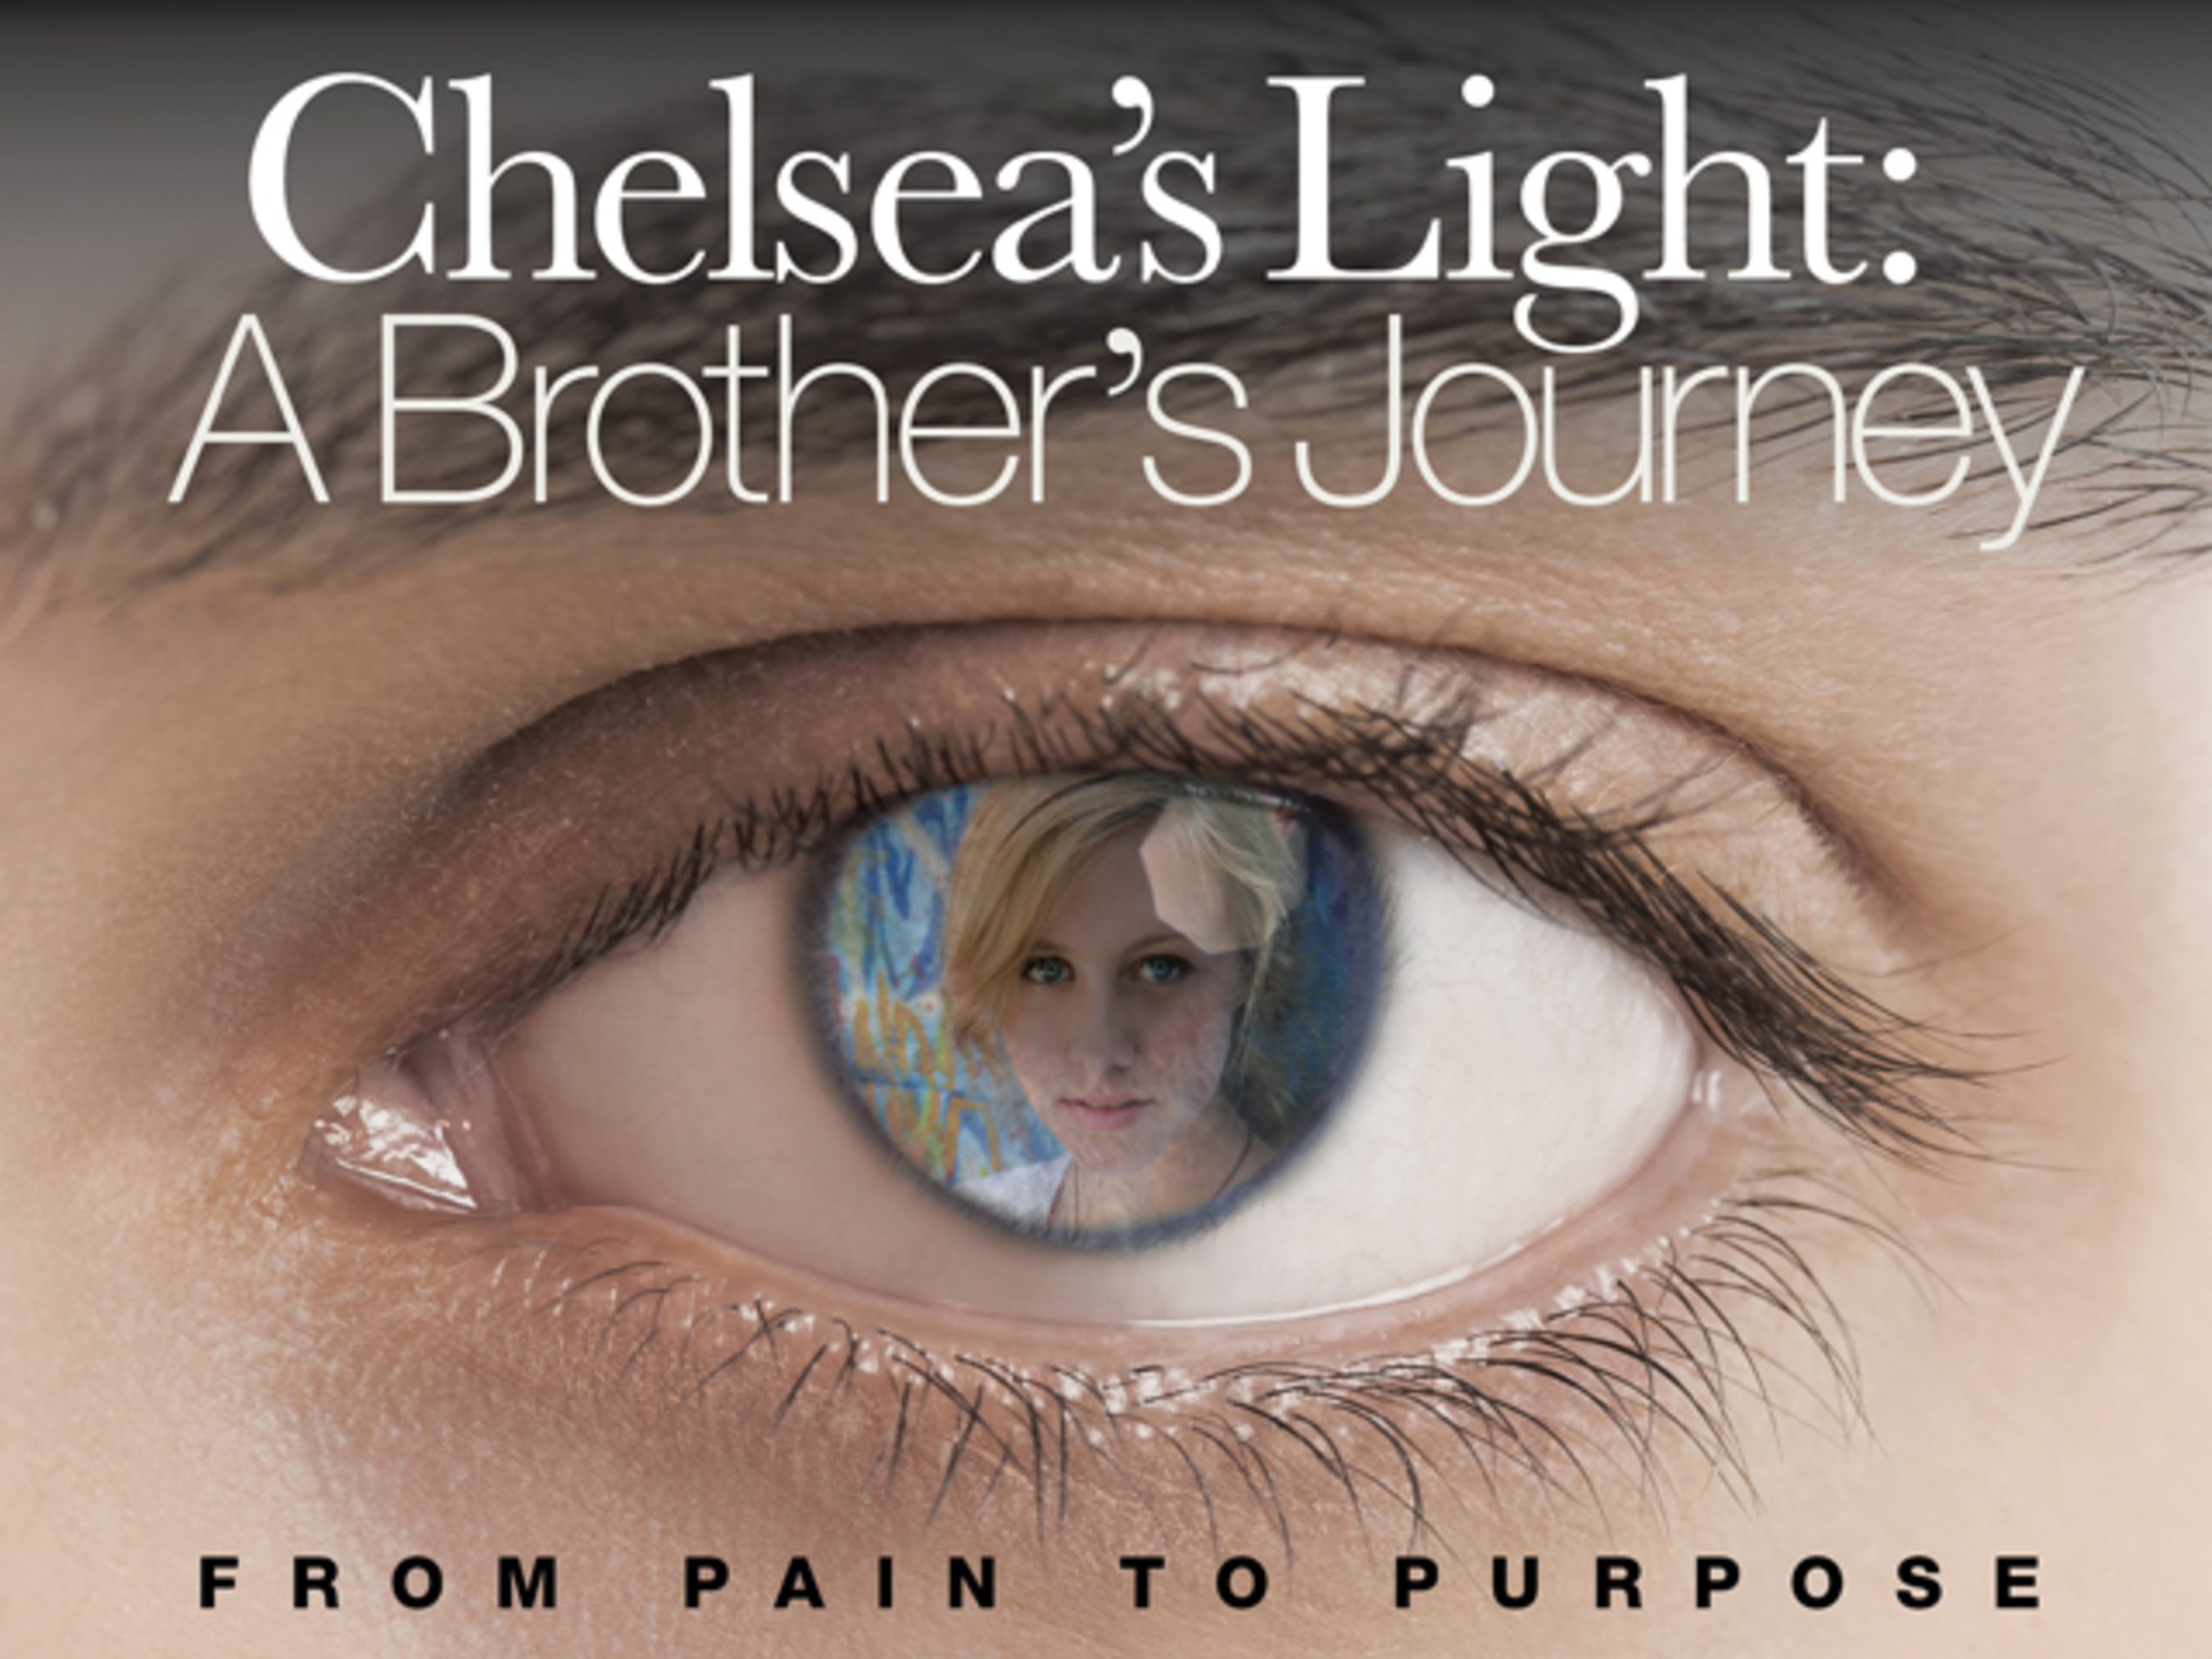 When Chelsea King was murdered a light was sparked. Her brother, Tyler King is telling Chelsea’s story and has launched a Kickstarter campaign to complete the documentary, “Chelsea’s Light: A Brother’s Journey” along with two-time Emmy award-winning director, Bruce Caulk. (PRNewsFoto/Chelsea's Light Foundation)